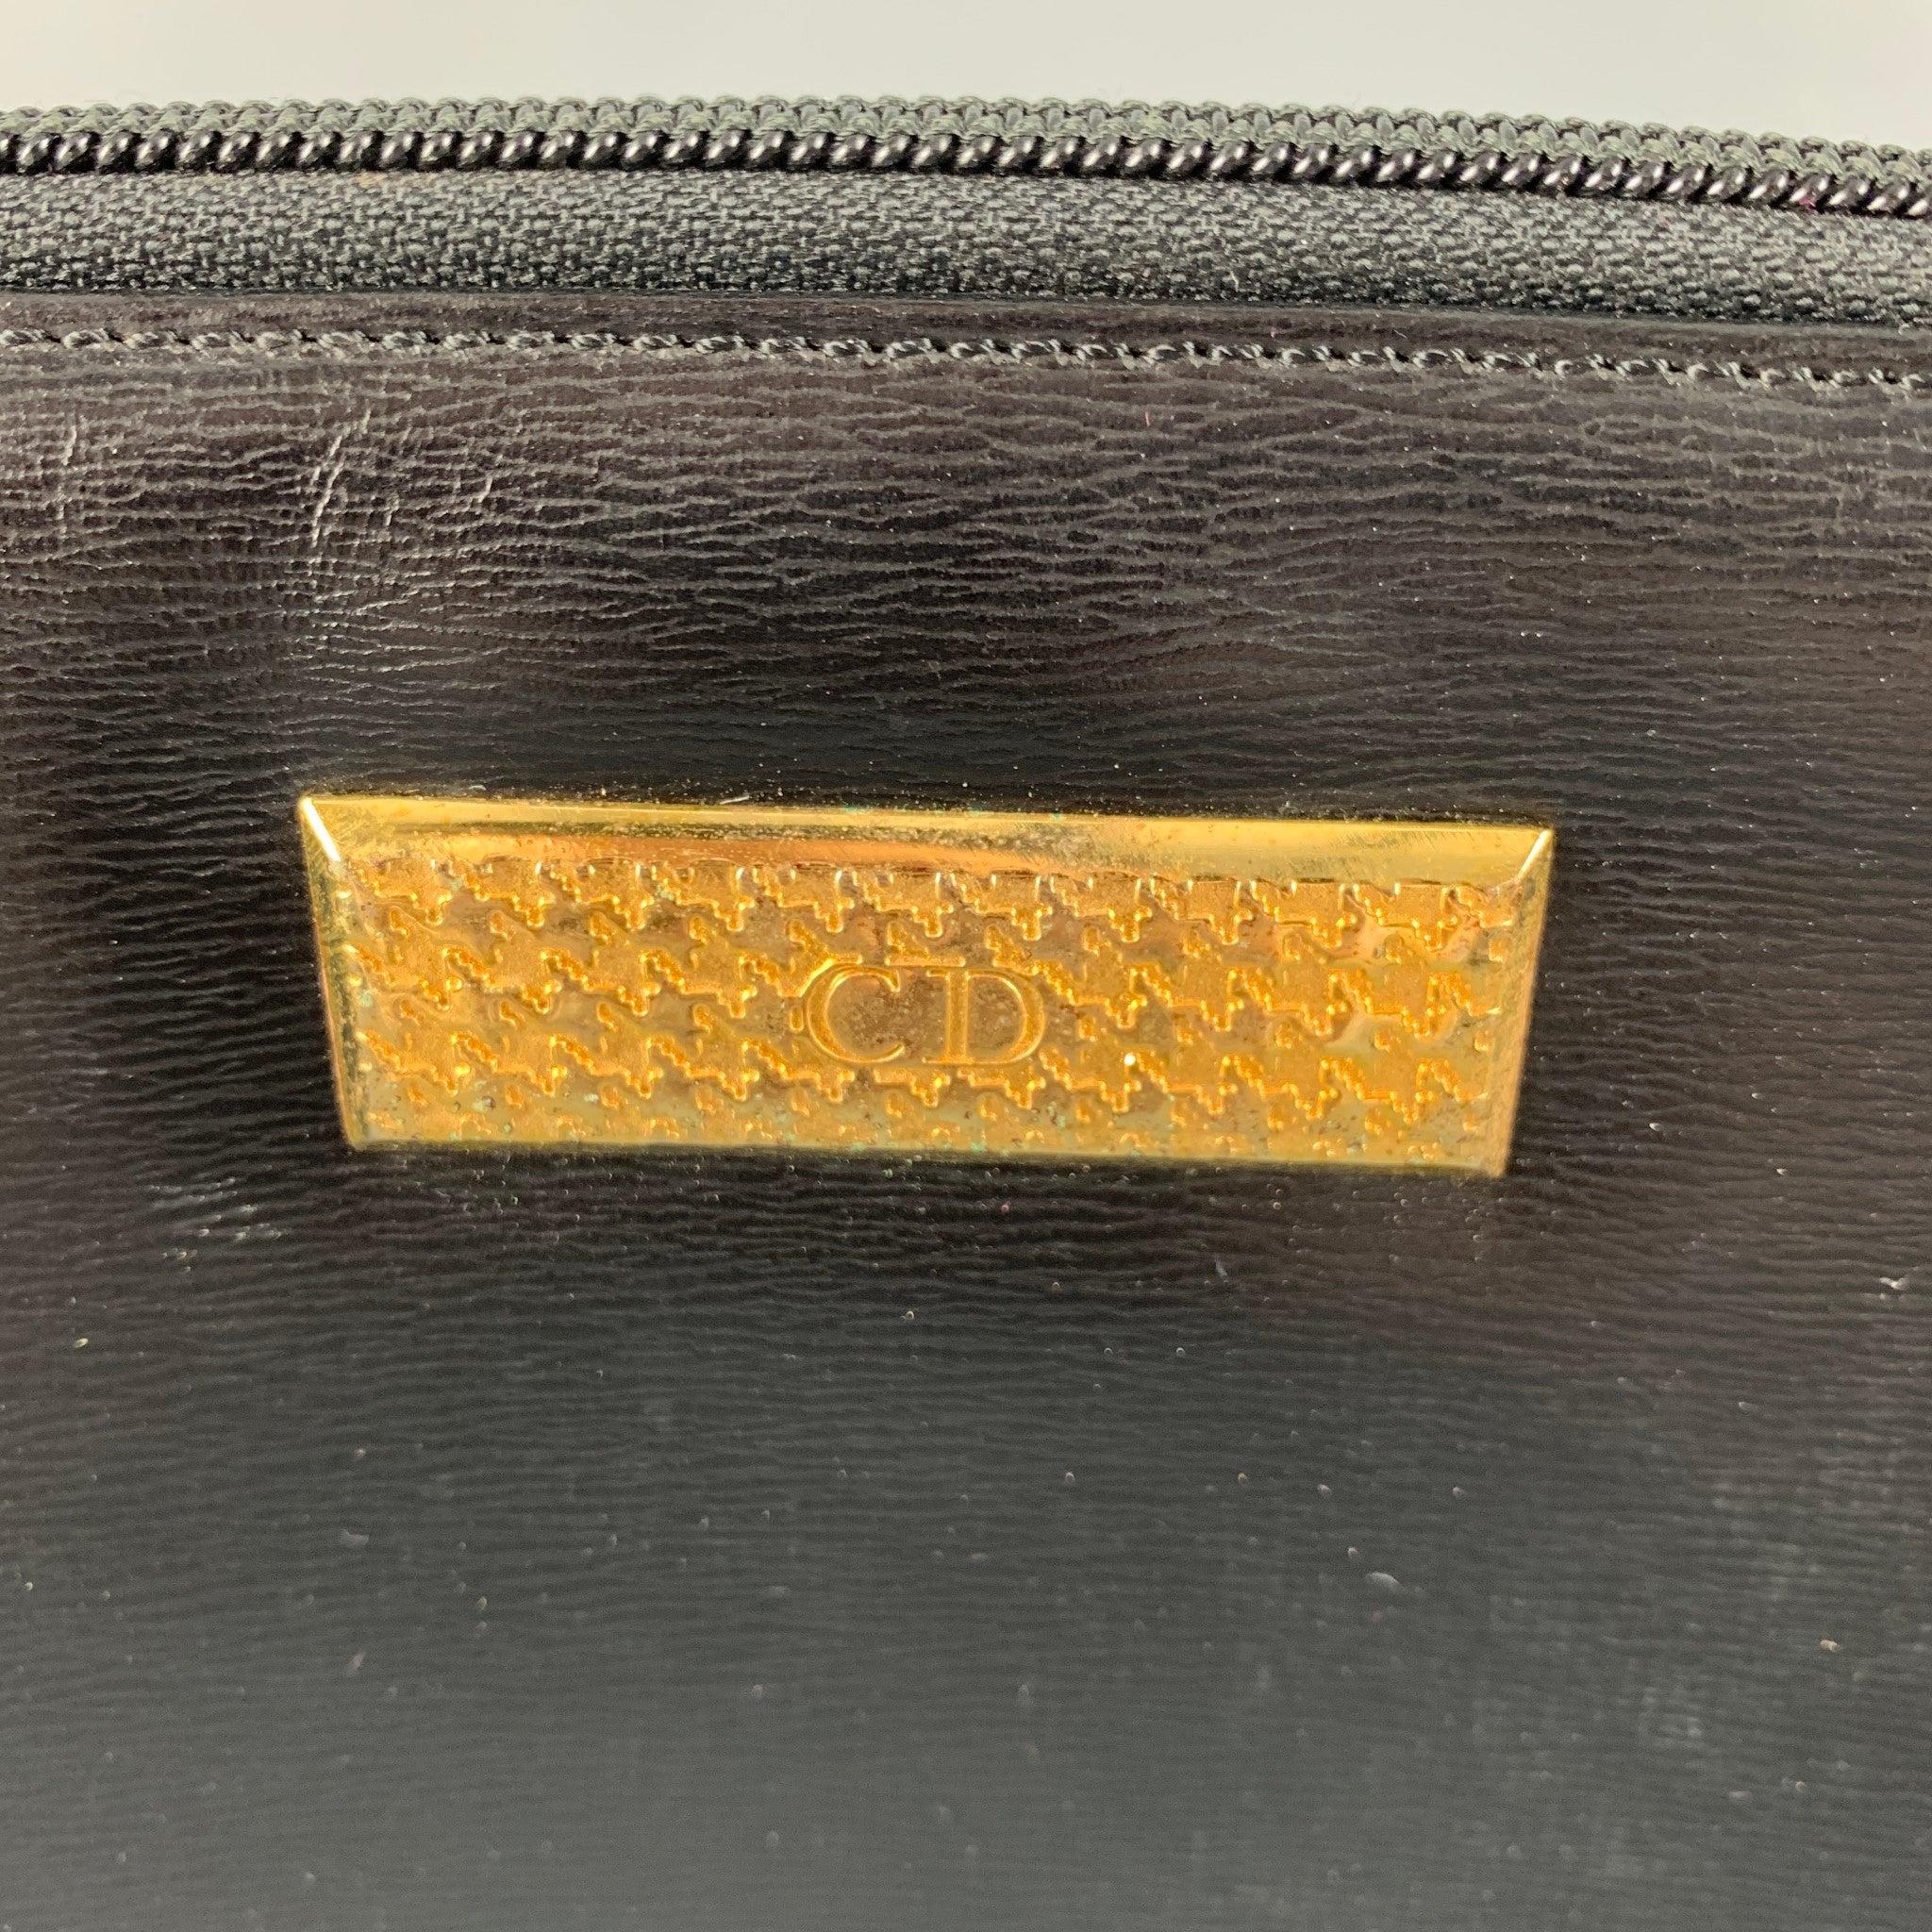 CHRISTIAN DIOR Black Leather Cross Body Handbag In Good Condition For Sale In San Francisco, CA